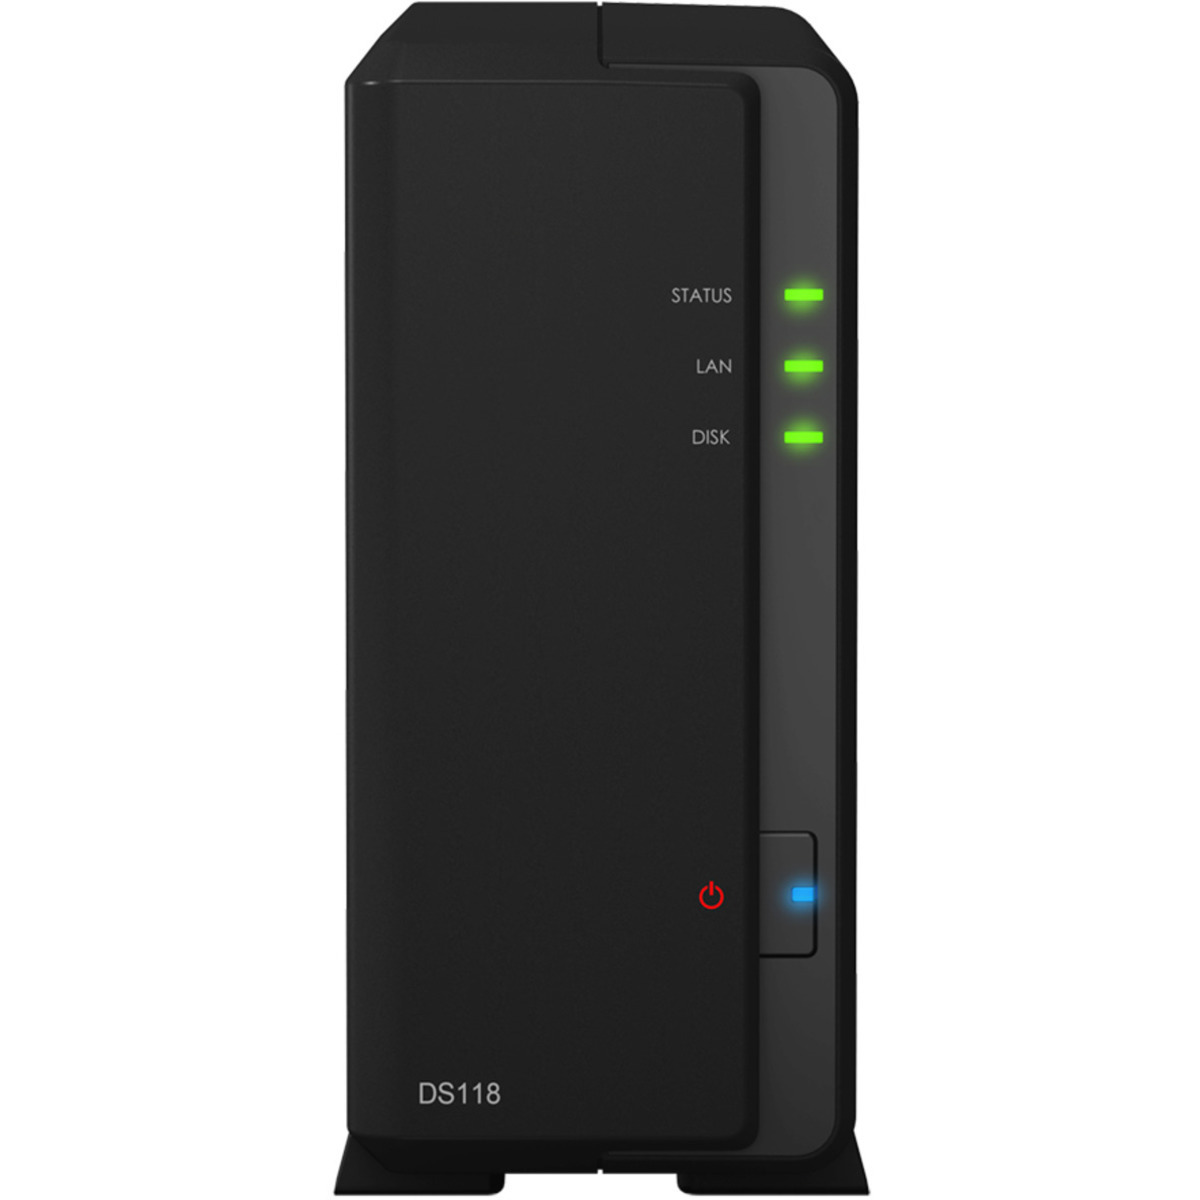 buy $328 Synology DiskStation DS118 2tb Desktop NAS - Network Attached Storage Device 1x2000gb Seagate BarraCuda ST2000DM008 3.5 7200rpm SATA 6Gb/s HDD CONSUMER Class Drives Installed - Burn-In Tested - nas headquarters buy network attached storage server device das new raid-5 free shipping simply usa DiskStation DS118